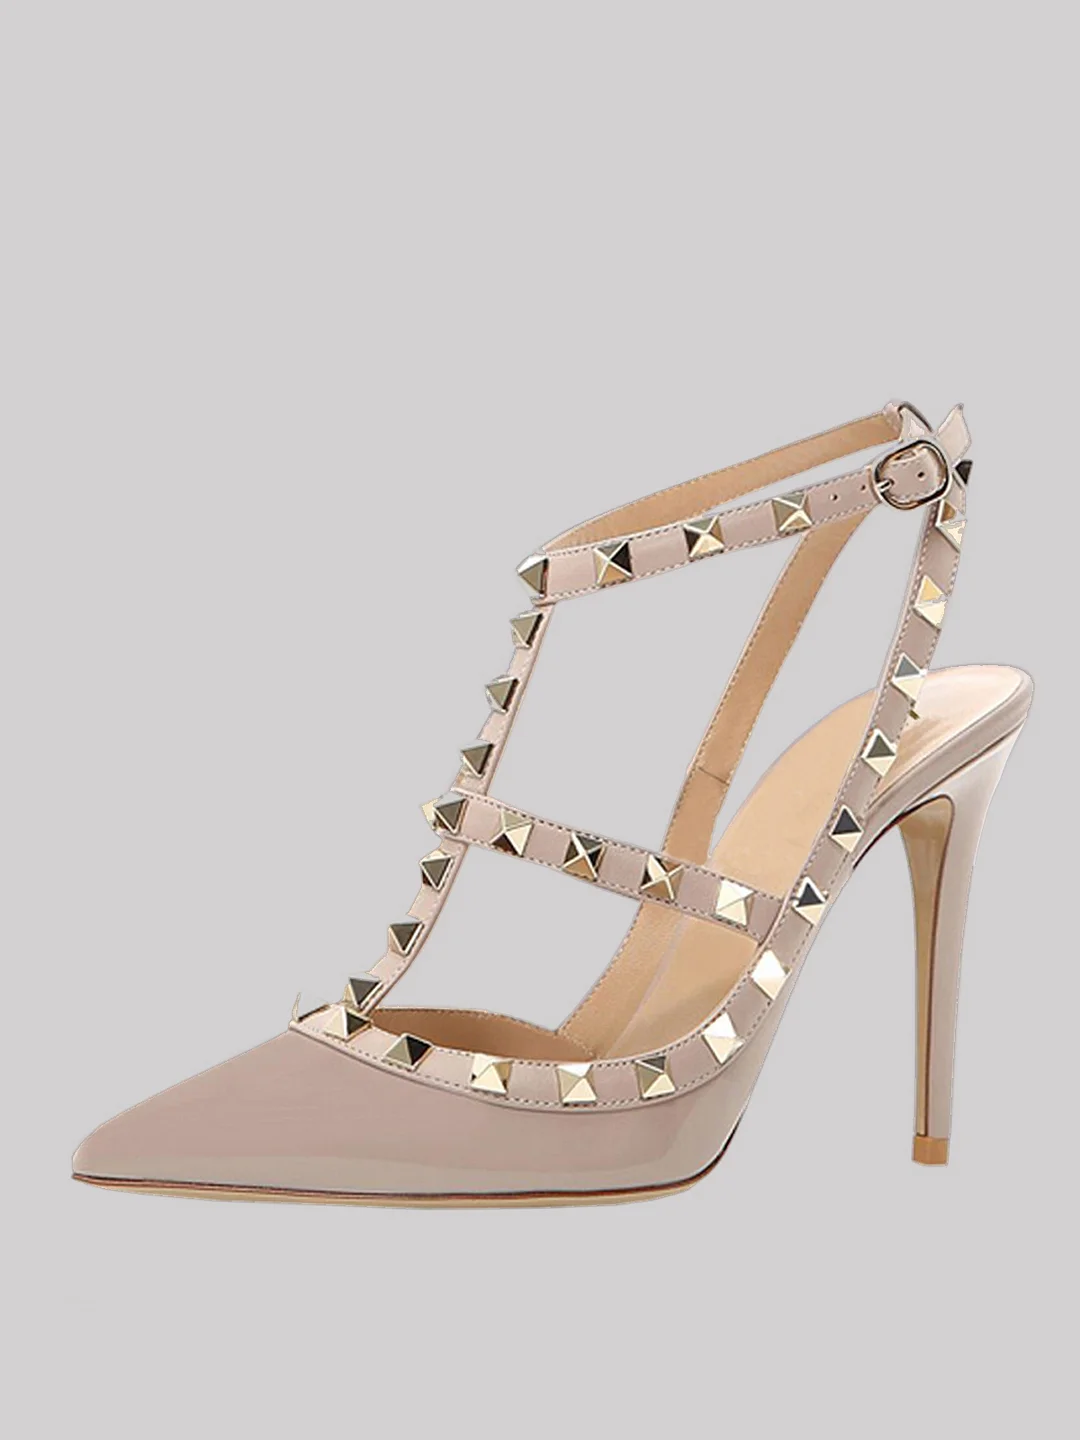 3.94" Women's Classic High Heels Rivets Sandals Pointed Toe Wedding Shoes